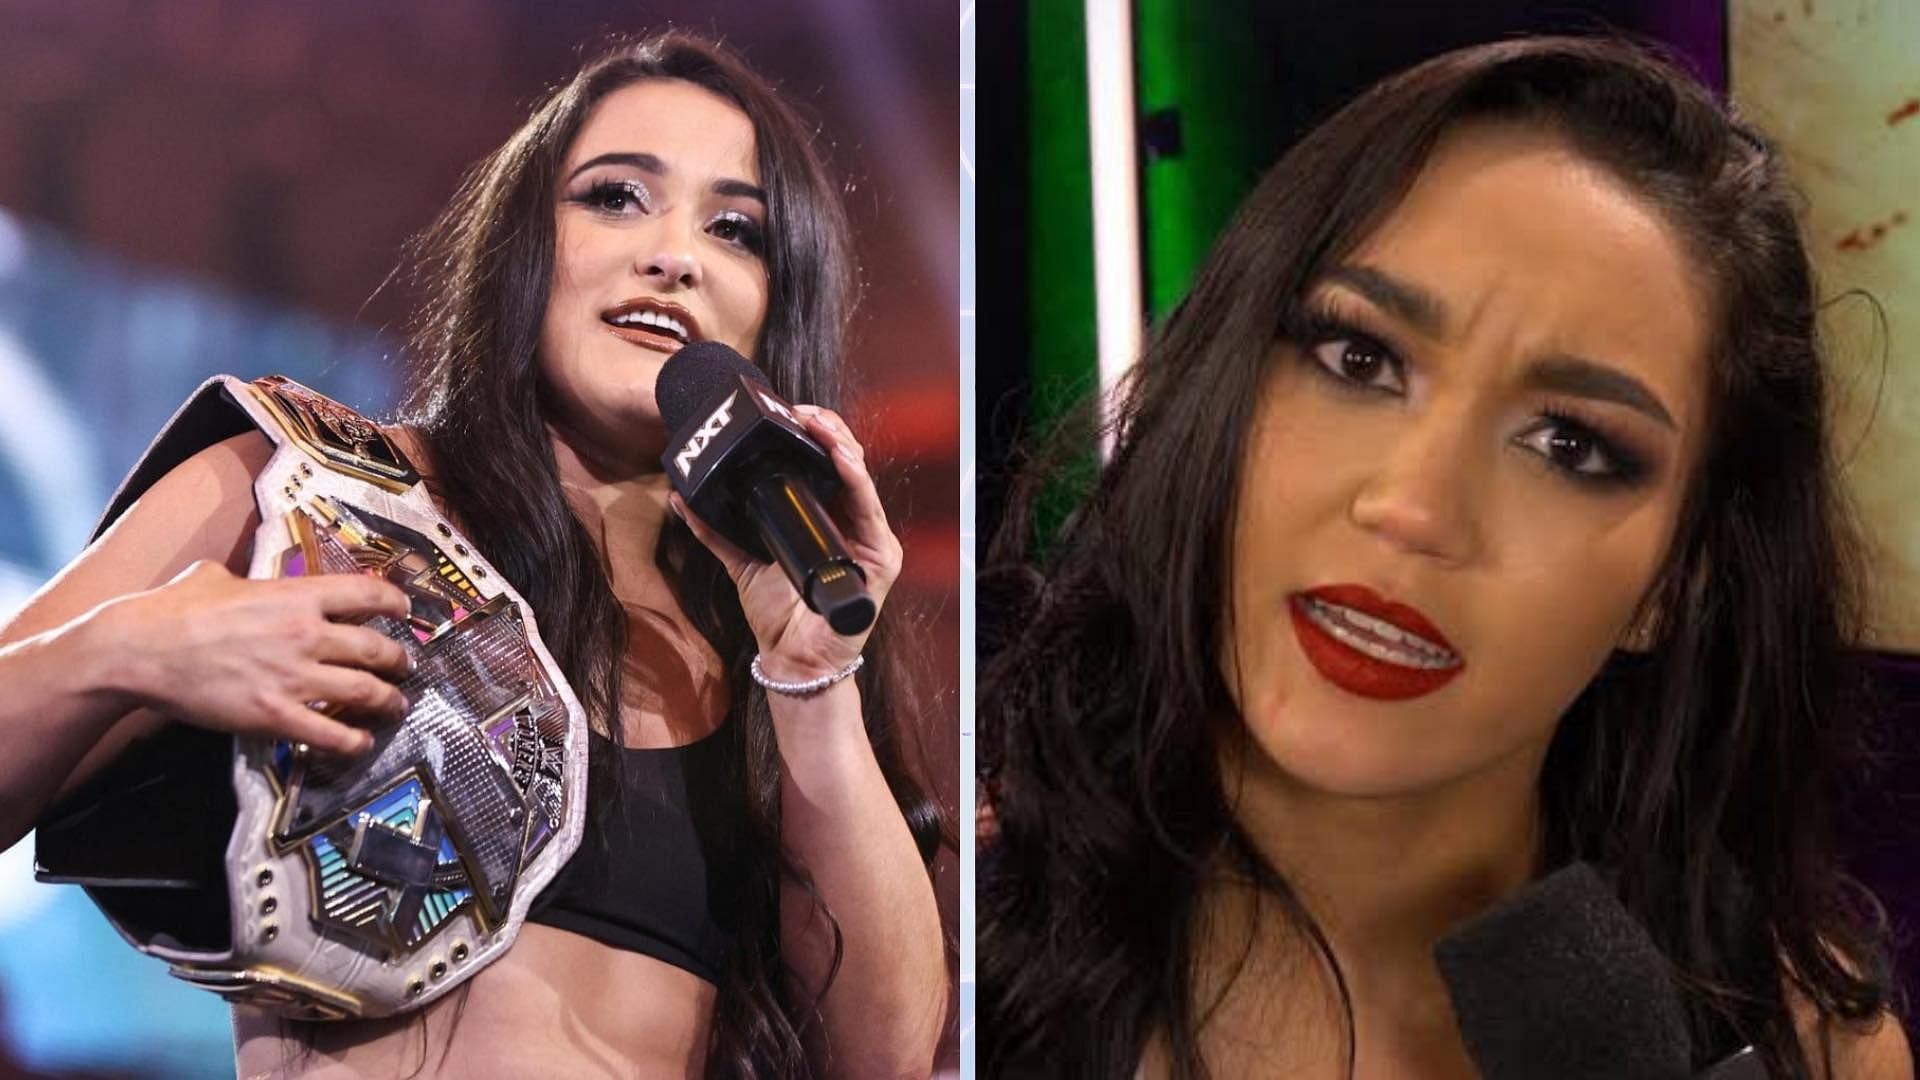 Roxanne Perez and Lyra Valkyria will clash at WWE